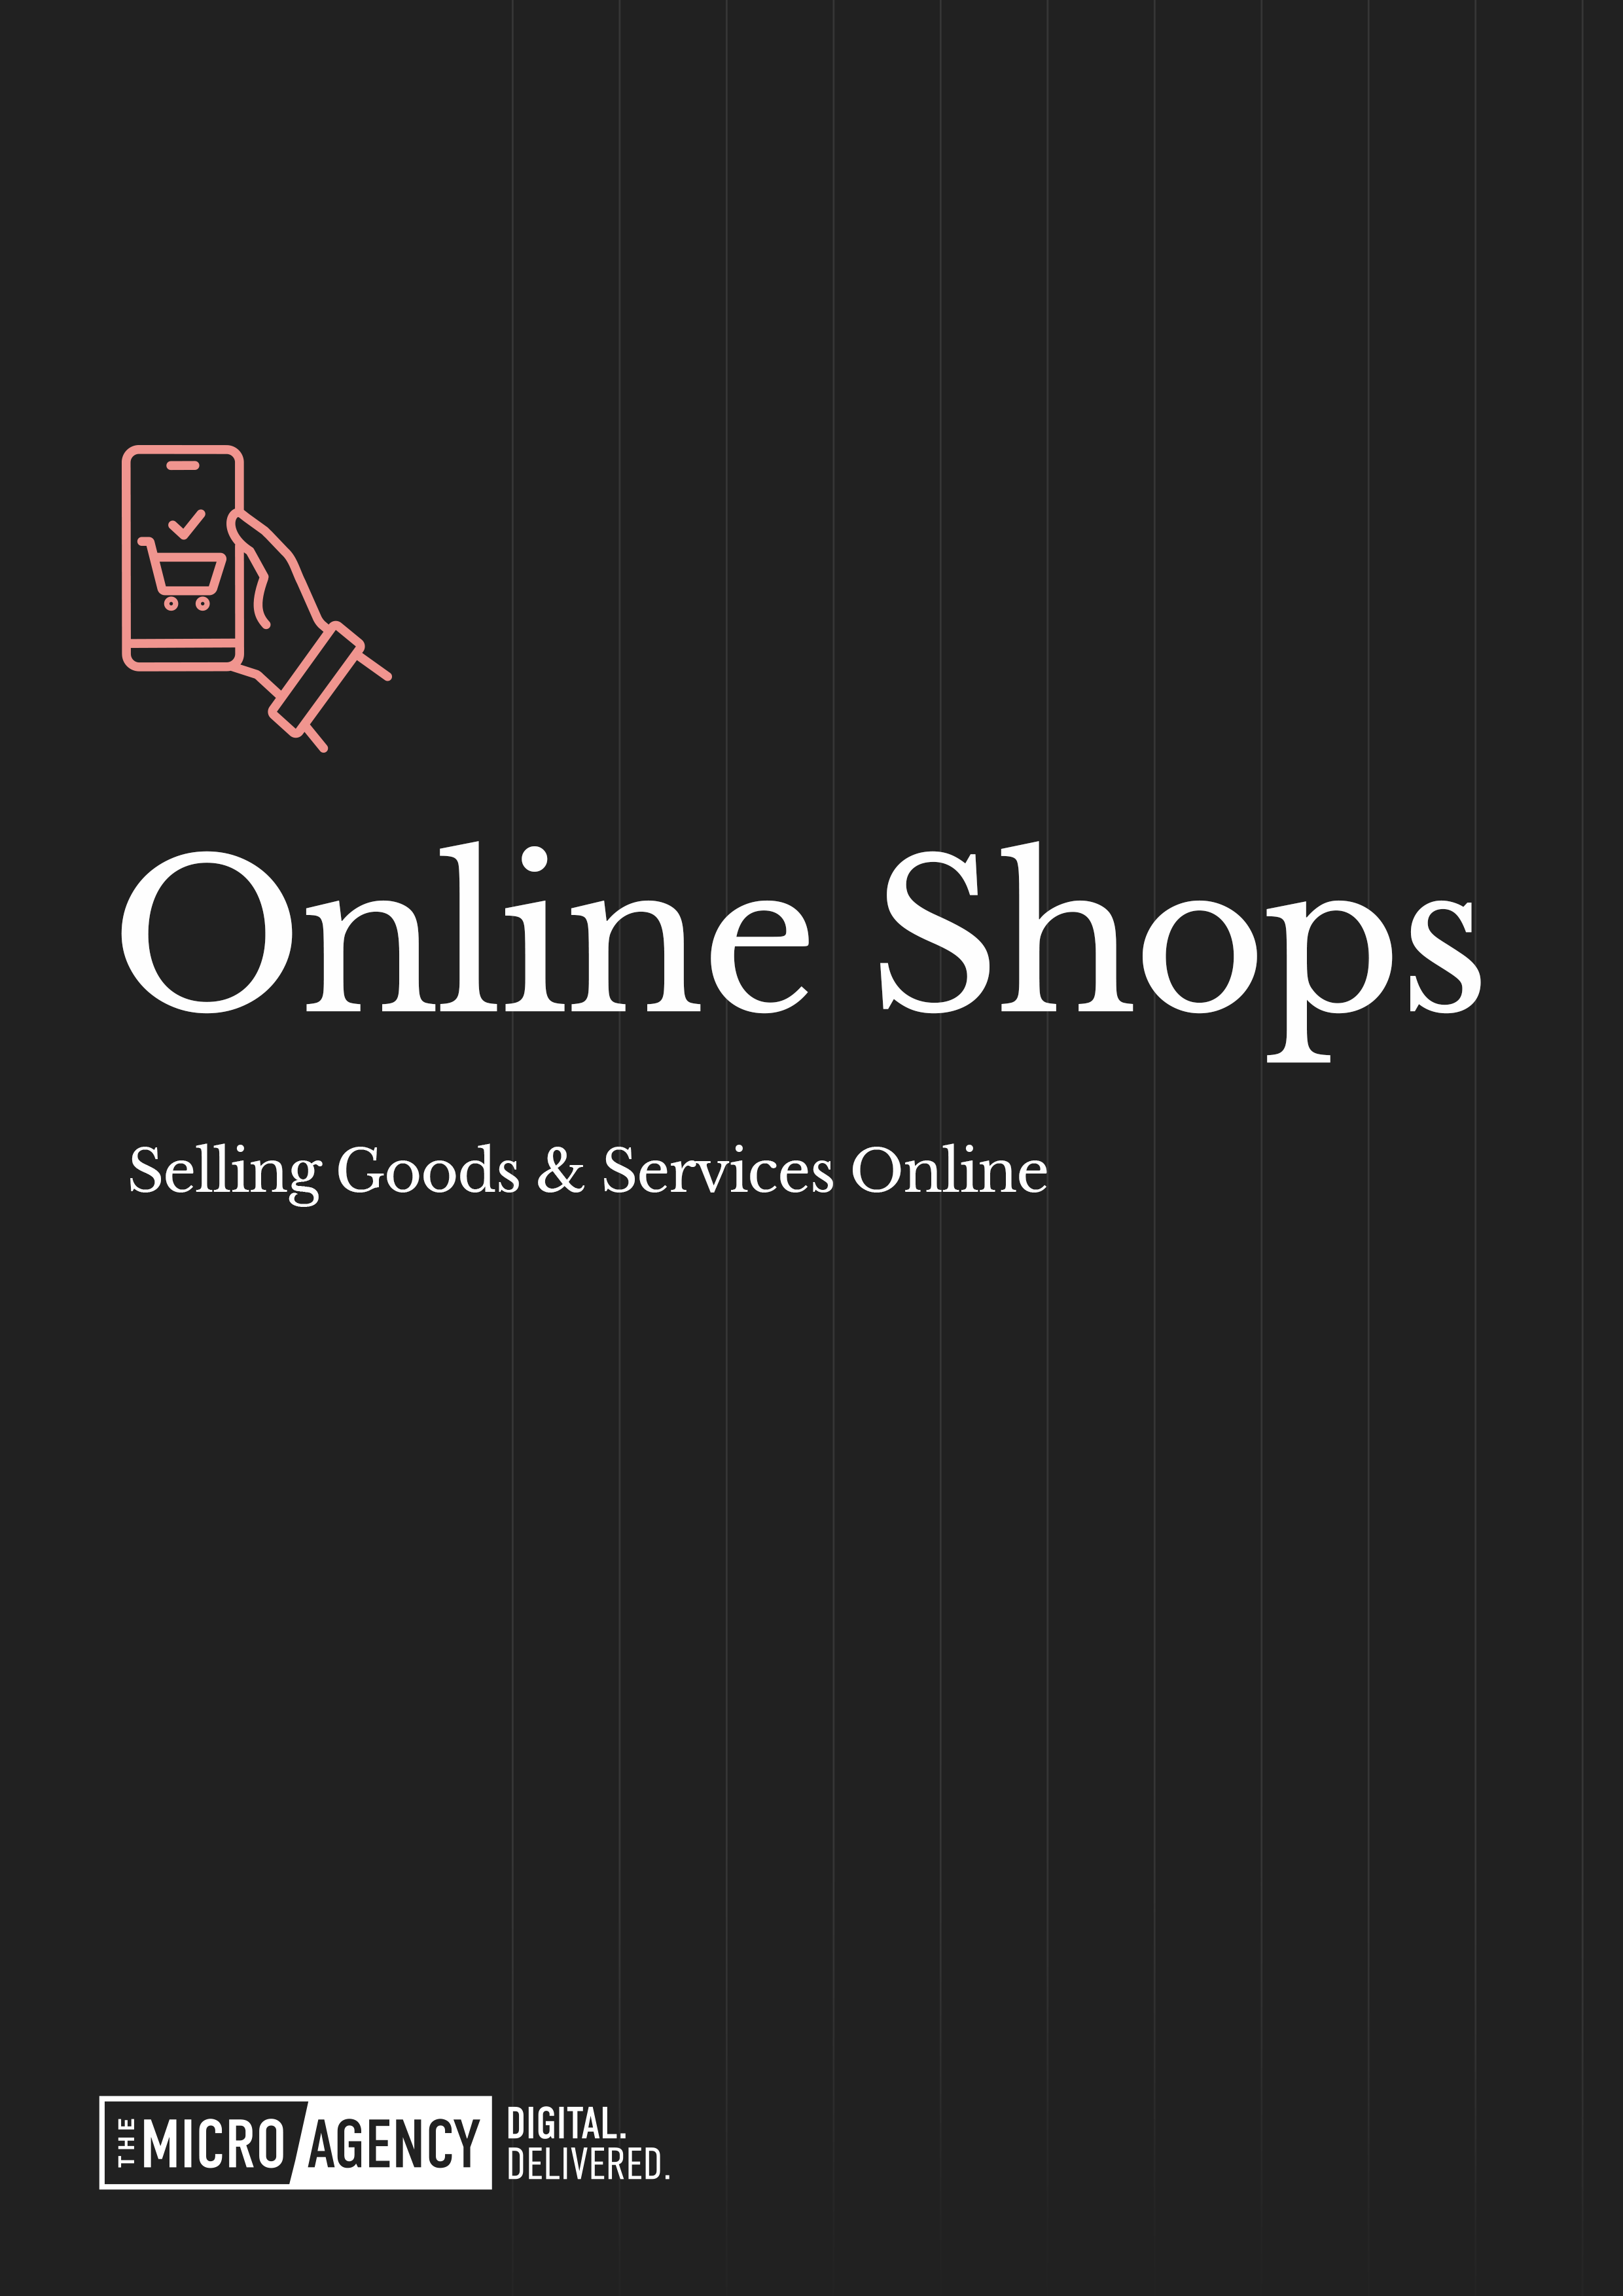 Online Shops - Selling goods and services online